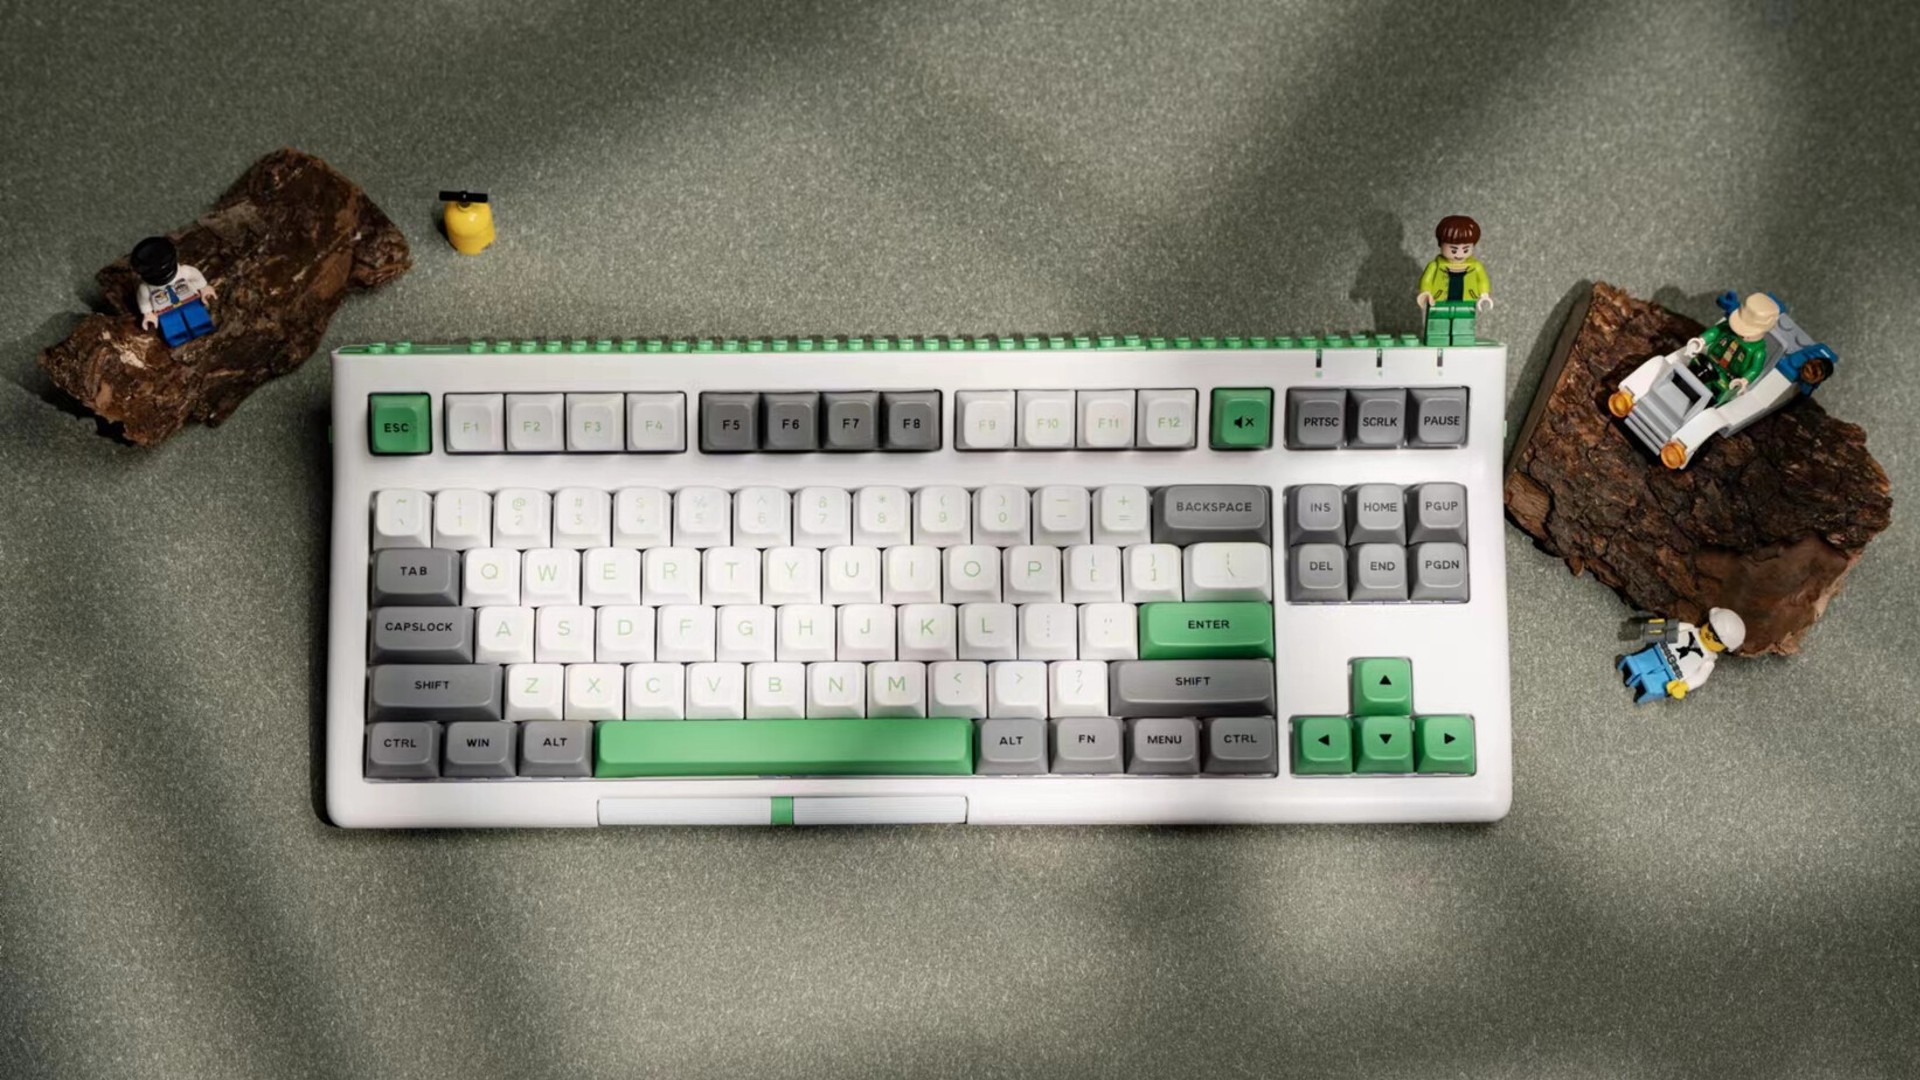 This creative keyboard is a Lego builder's dream